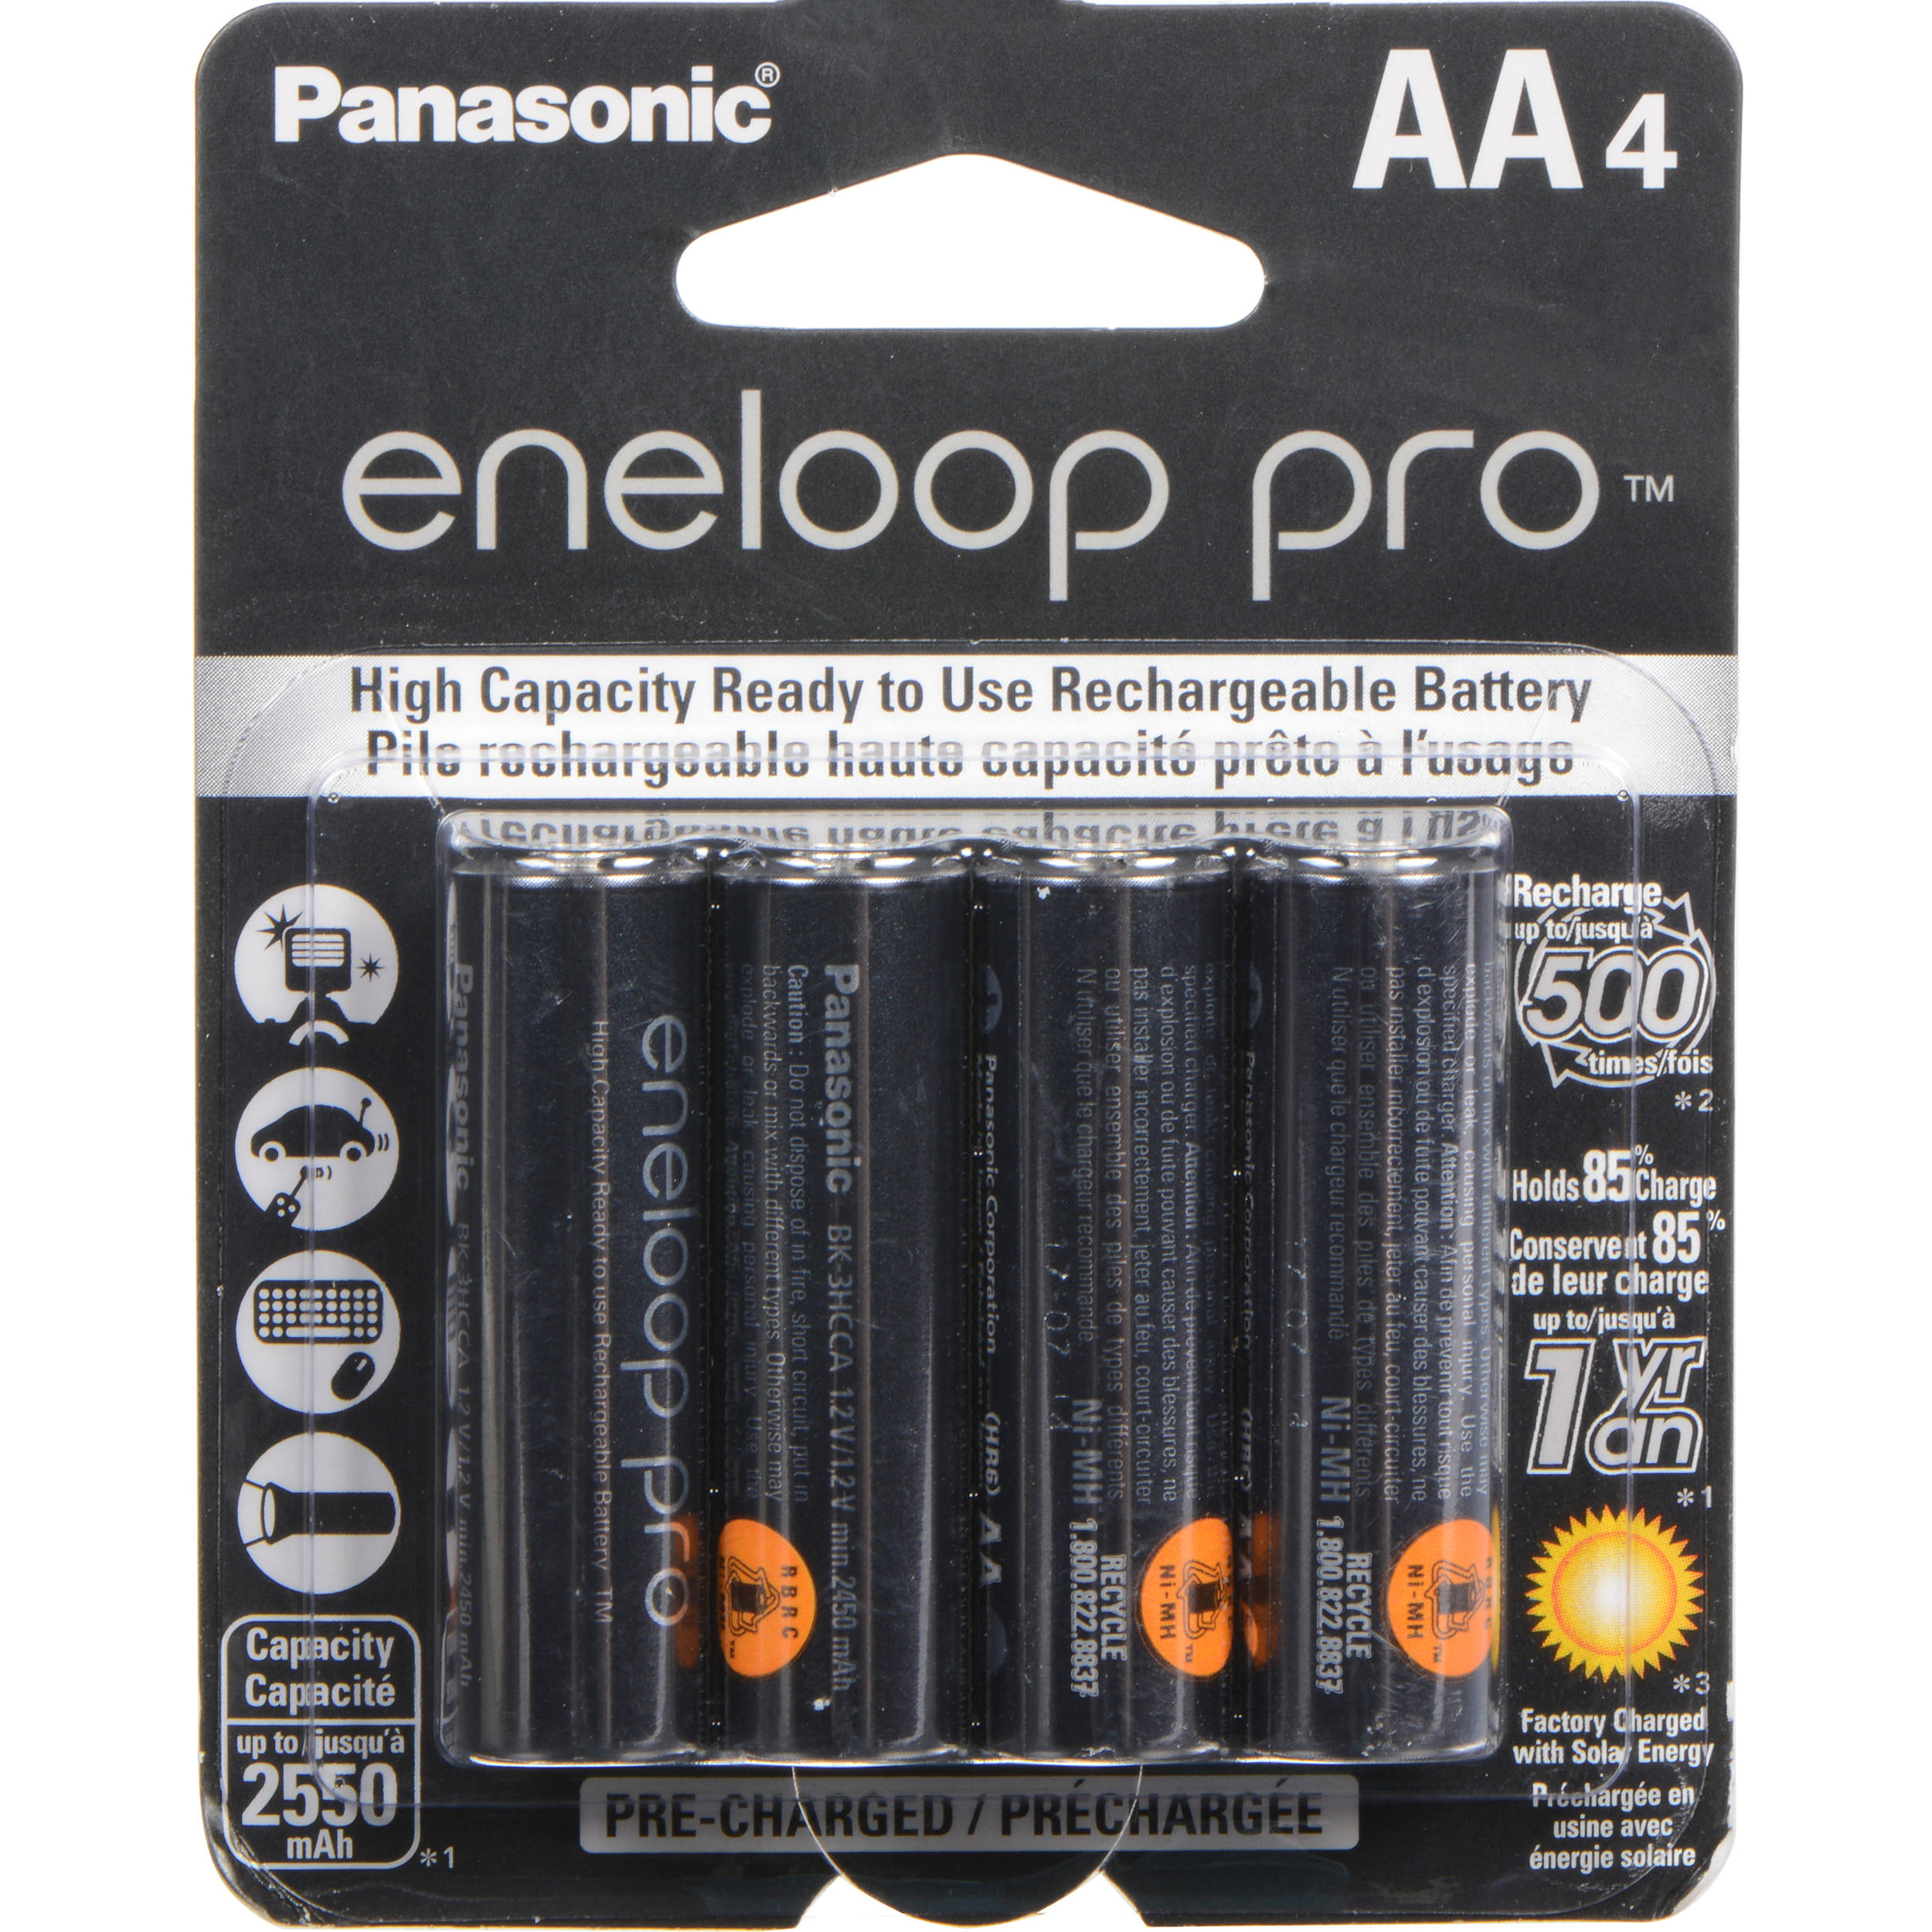 4 aa rechargeable battery pack